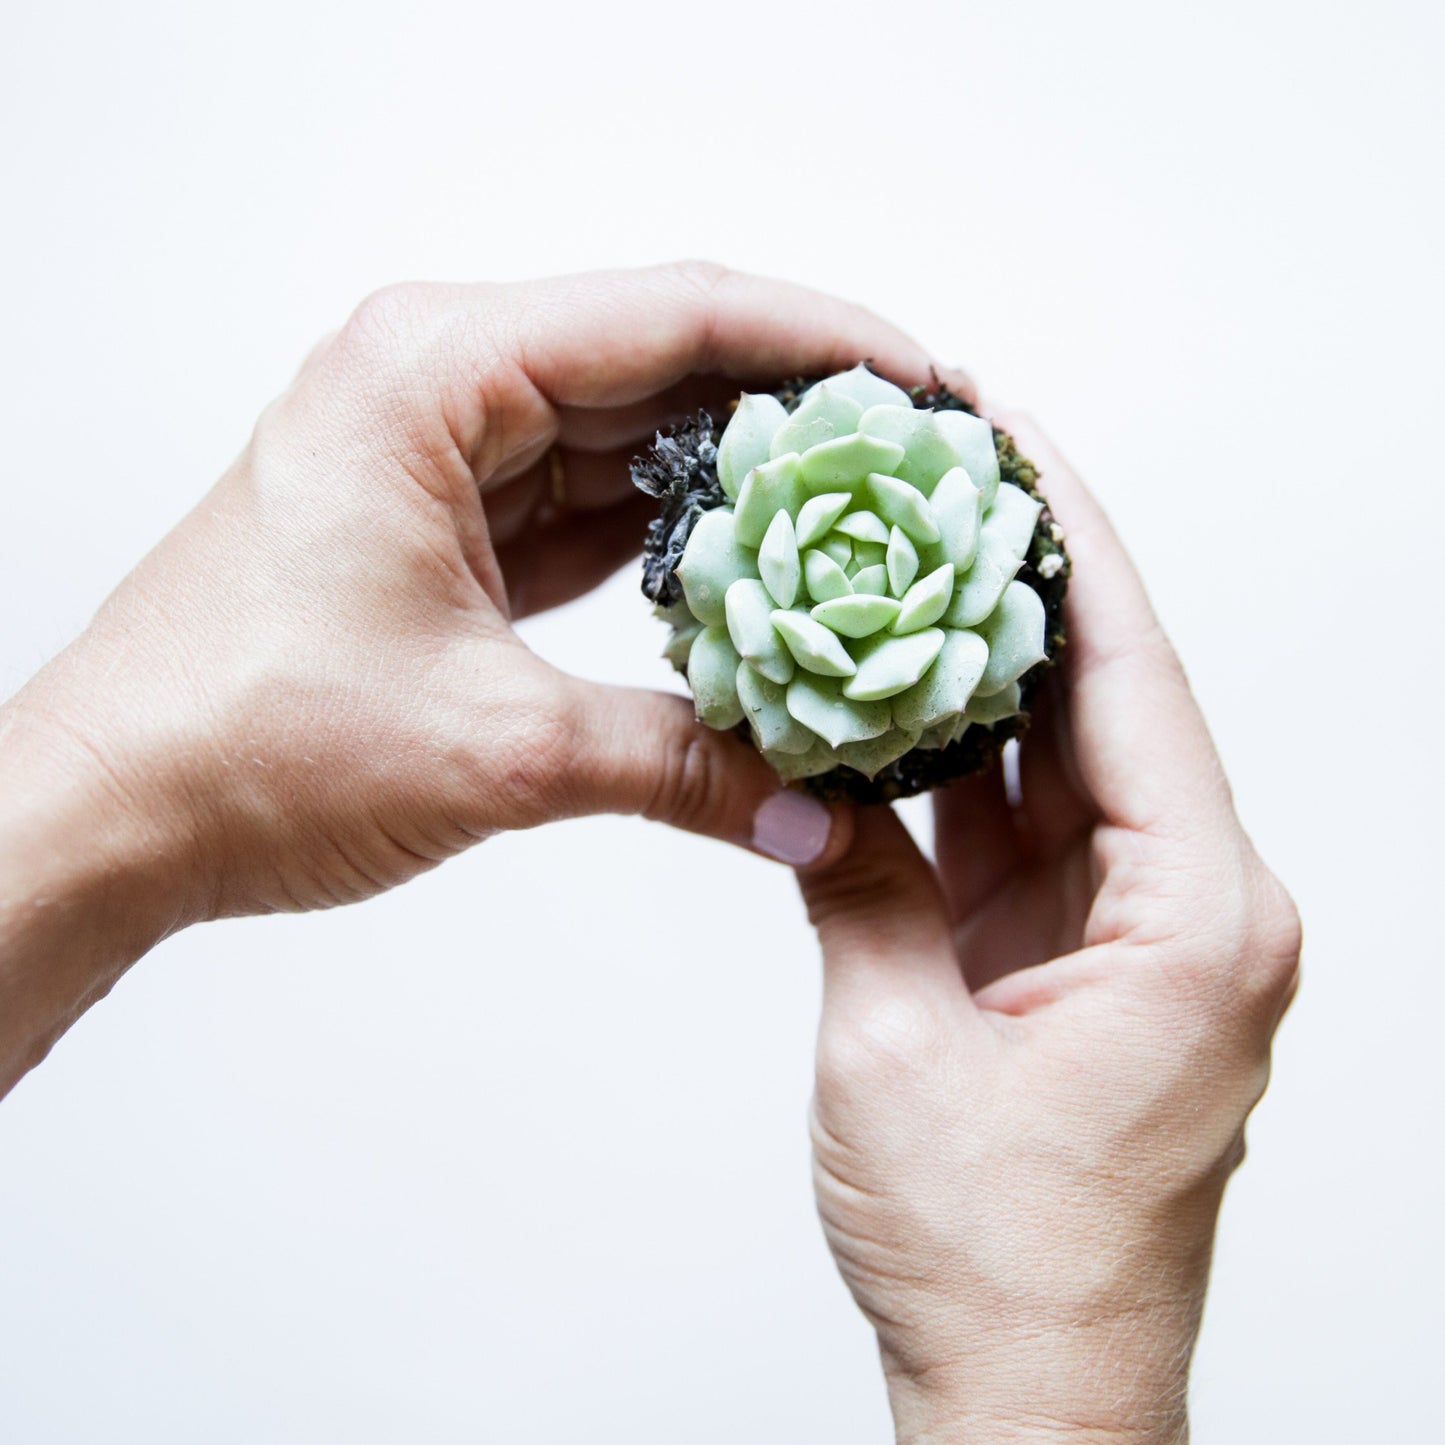 On a white background is a model holding up an Echeveria Painted Lady Succulent.